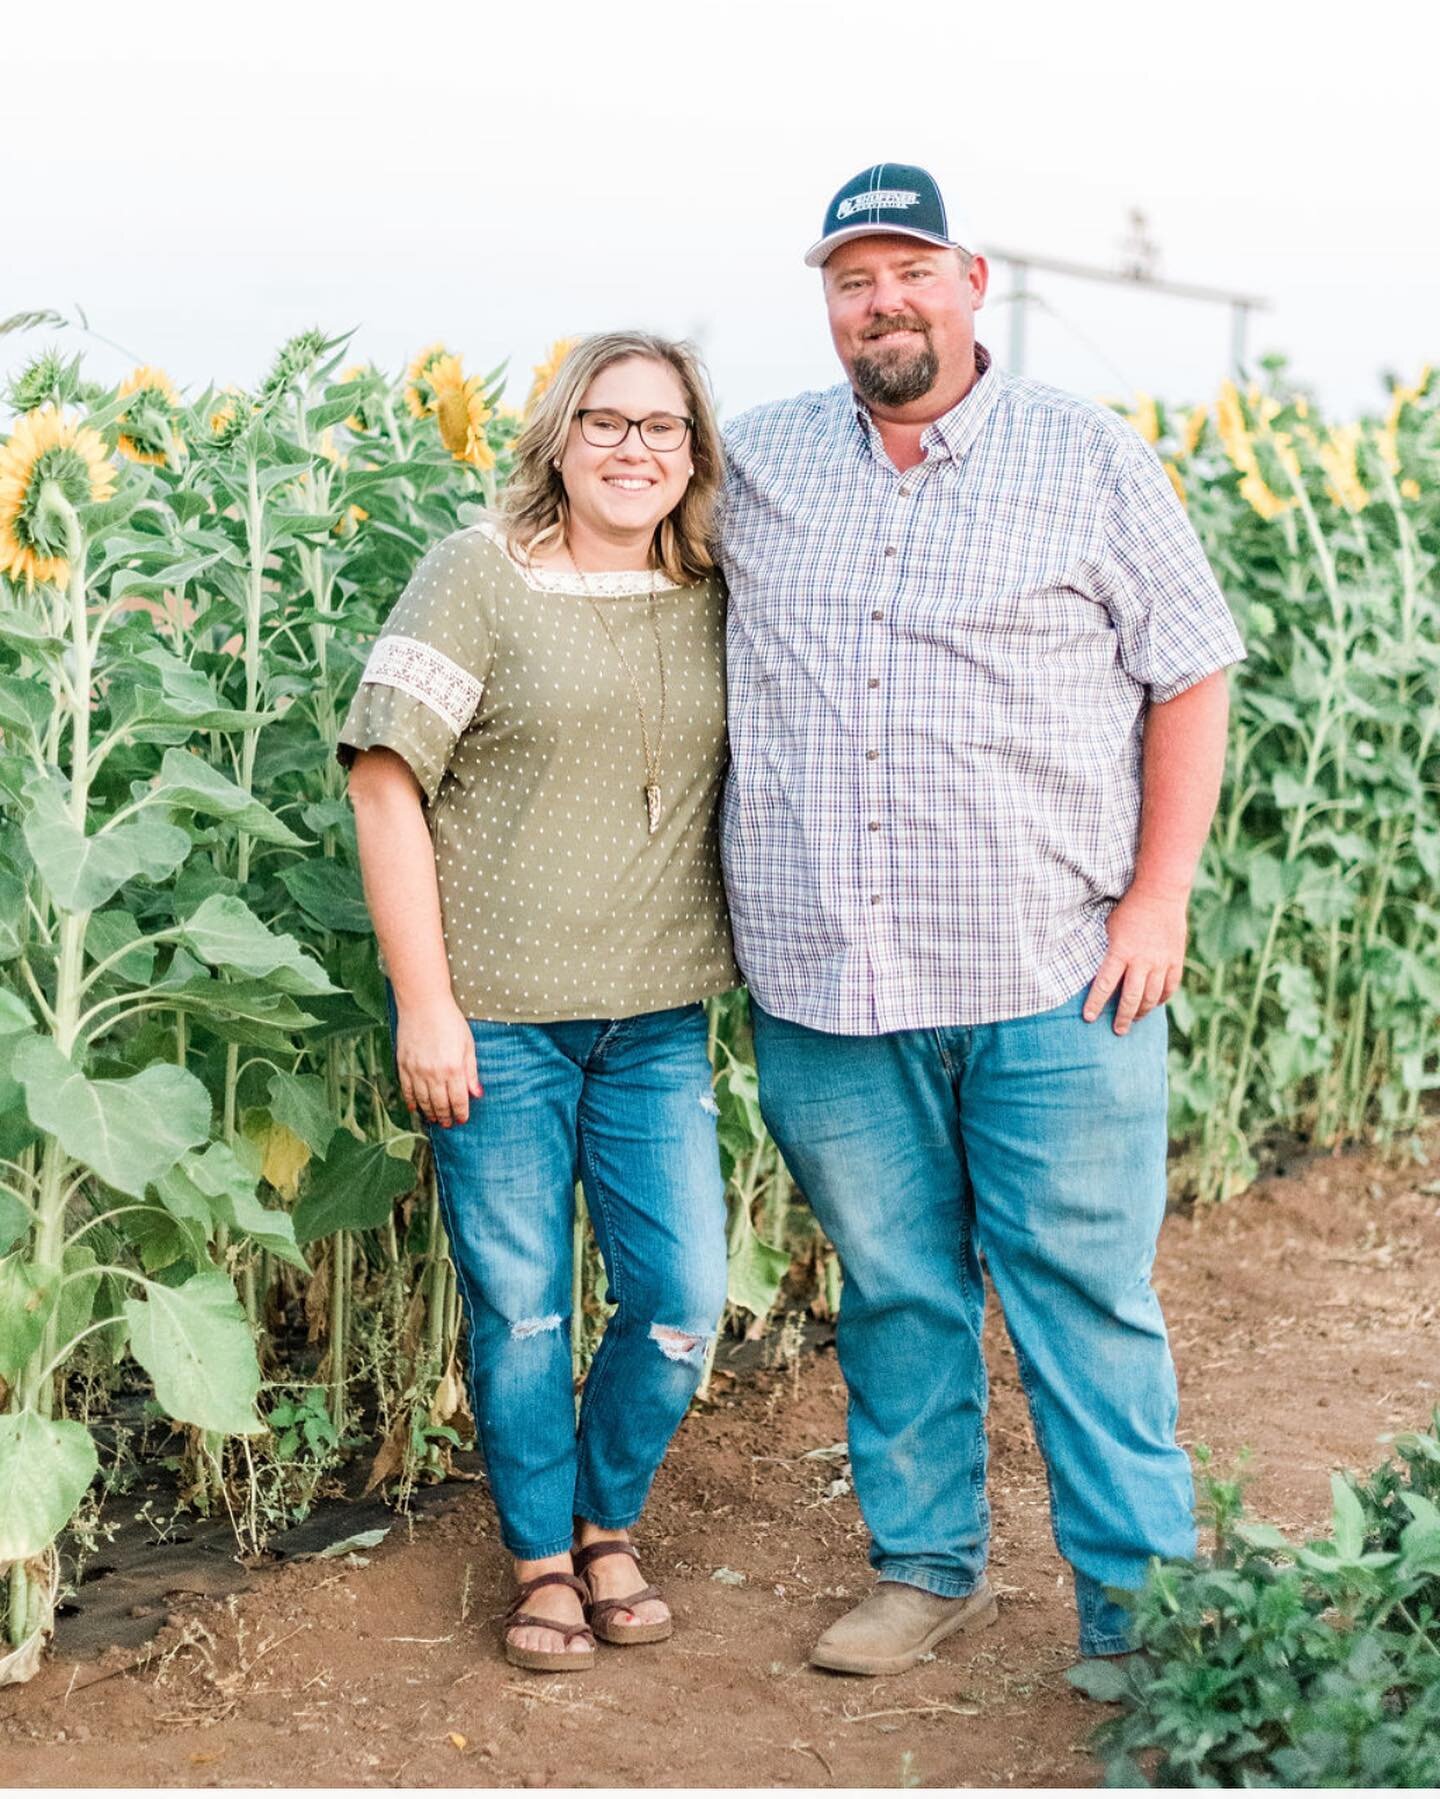 #fridayintroductions, my husband Luke is my most valuable player and supporter. 
&mdash;&mdash;&mdash;&mdash;&mdash;&mdash;&mdash;&mdash;&mdash;

I&rsquo;m Luke aka the flower farmers husband and the pumpkin farmer at Sweet Thistle Farms 

Farmer - G